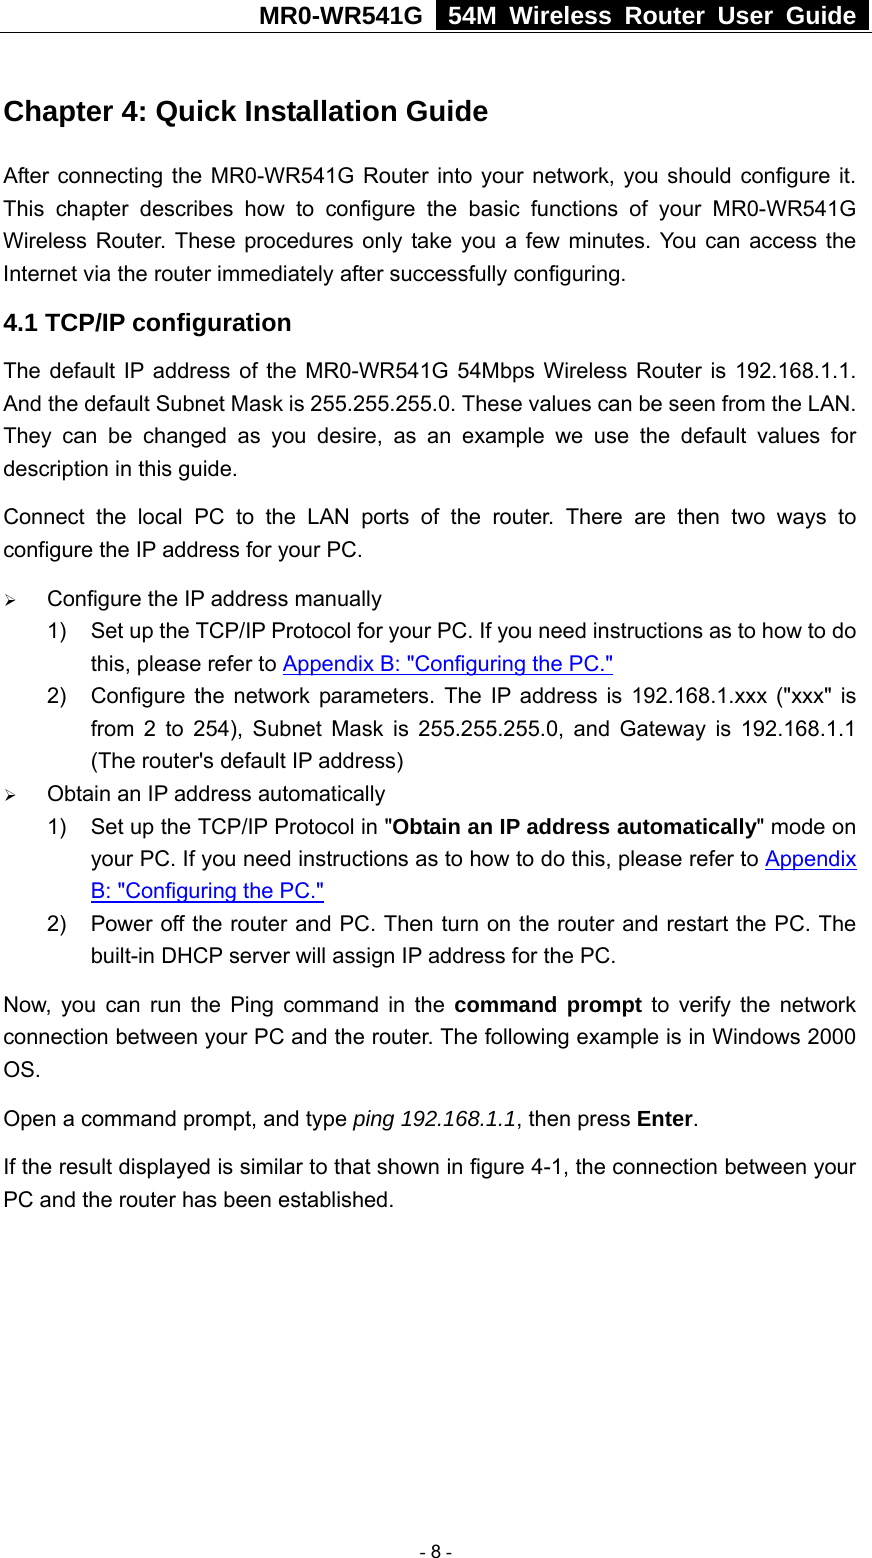 MR0-WR541G   54M Wireless Router User Guide  Chapter 4: Quick Installation Guide After connecting the MR0-WR541G Router into your network, you should configure it. This chapter describes how to configure the basic functions of your MR0-WR541G Wireless Router. These procedures only take you a few minutes. You can access the Internet via the router immediately after successfully configuring. 4.1 TCP/IP configuration The default IP address of the MR0-WR541G 54Mbps Wireless Router is 192.168.1.1. And the default Subnet Mask is 255.255.255.0. These values can be seen from the LAN. They can be changed as you desire, as an example we use the default values for description in this guide. Connect the local PC to the LAN ports of the router. There are then two ways to configure the IP address for your PC. ¾ Configure the IP address manually 1)  Set up the TCP/IP Protocol for your PC. If you need instructions as to how to do this, please refer to Appendix B: &quot;Configuring the PC.&quot; 2)  Configure the network parameters. The IP address is 192.168.1.xxx (&quot;xxx&quot; is from 2 to 254), Subnet Mask is 255.255.255.0, and Gateway is 192.168.1.1 (The router&apos;s default IP address) ¾ Obtain an IP address automatically 1)  Set up the TCP/IP Protocol in &quot;Obtain an IP address automatically&quot; mode on your PC. If you need instructions as to how to do this, please refer to Appendix B: &quot;Configuring the PC.&quot; 2)  Power off the router and PC. Then turn on the router and restart the PC. The built-in DHCP server will assign IP address for the PC. Now, you can run the Ping command in the command prompt to verify the network connection between your PC and the router. The following example is in Windows 2000 OS. Open a command prompt, and type ping 192.168.1.1, then press Enter. If the result displayed is similar to that shown in figure 4-1, the connection between your PC and the router has been established.    - 8 - 